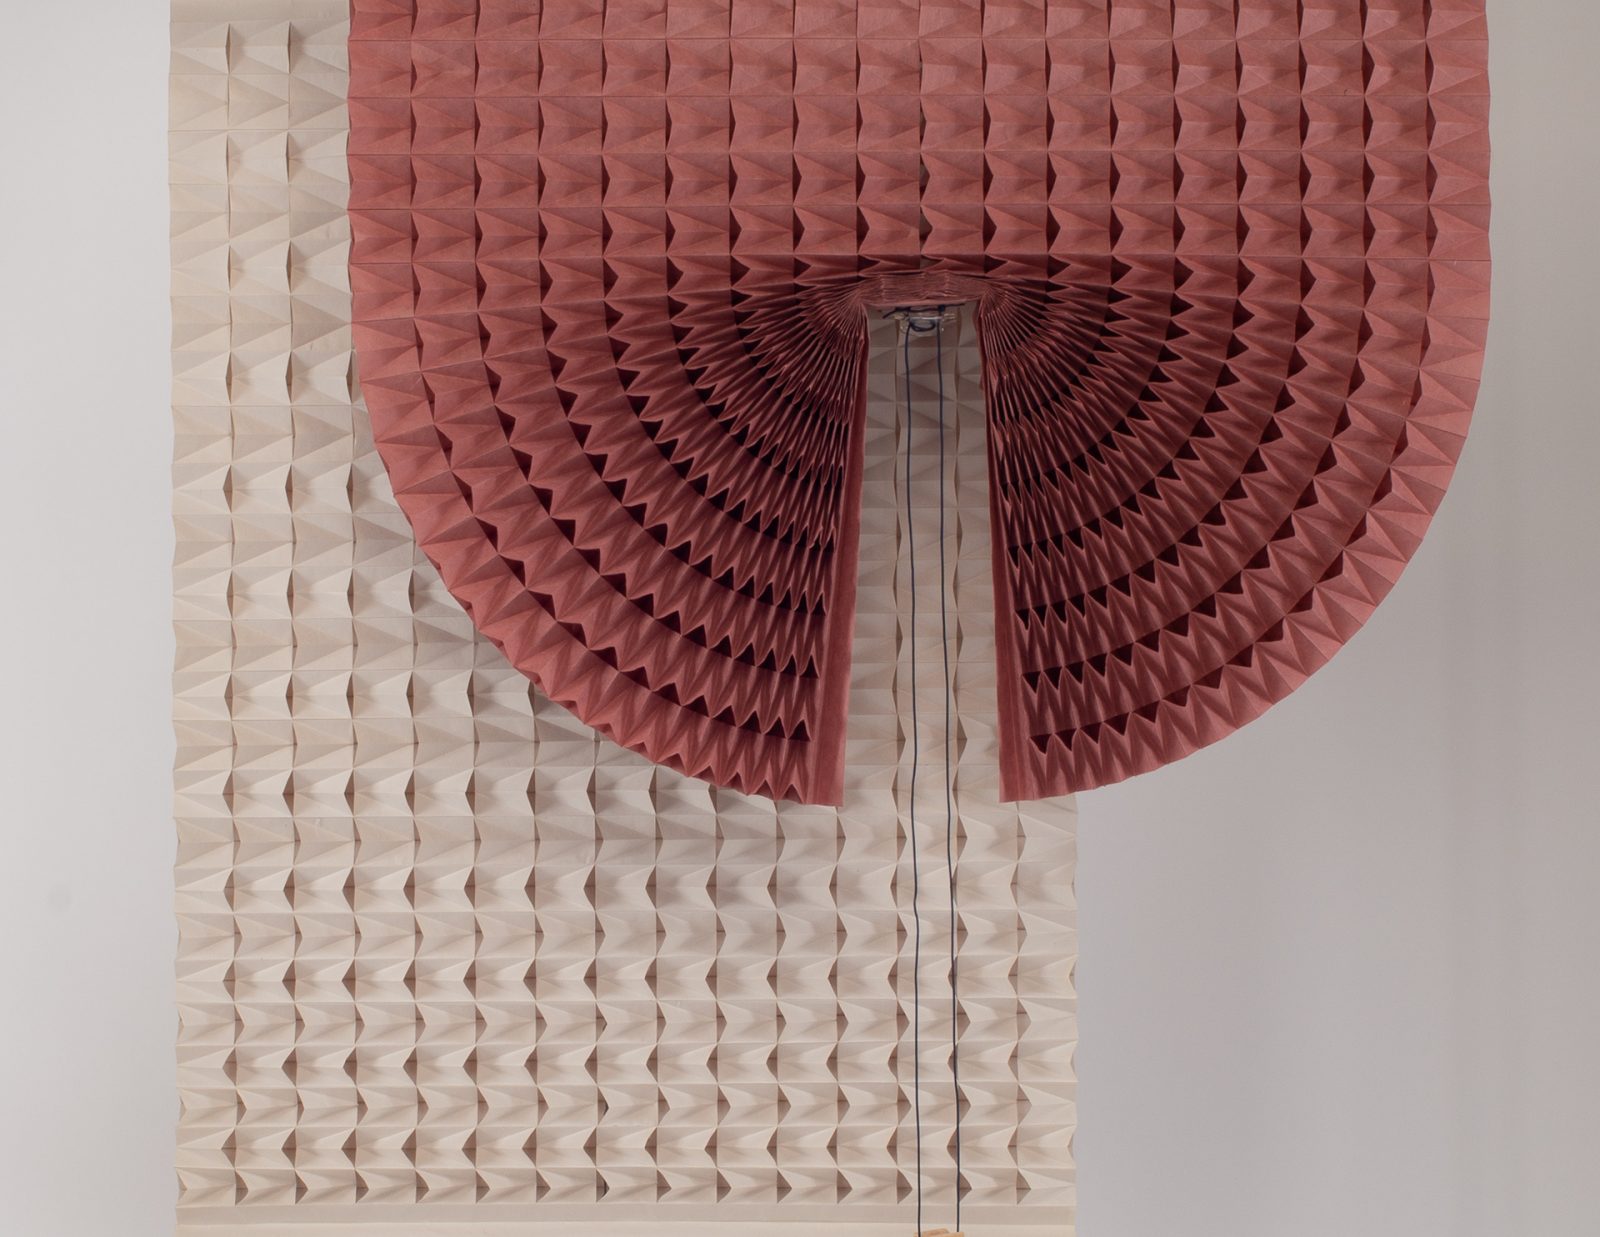 Natchar Sawatdichai's Paper Blinds Are a Testament to Modern Artisanry